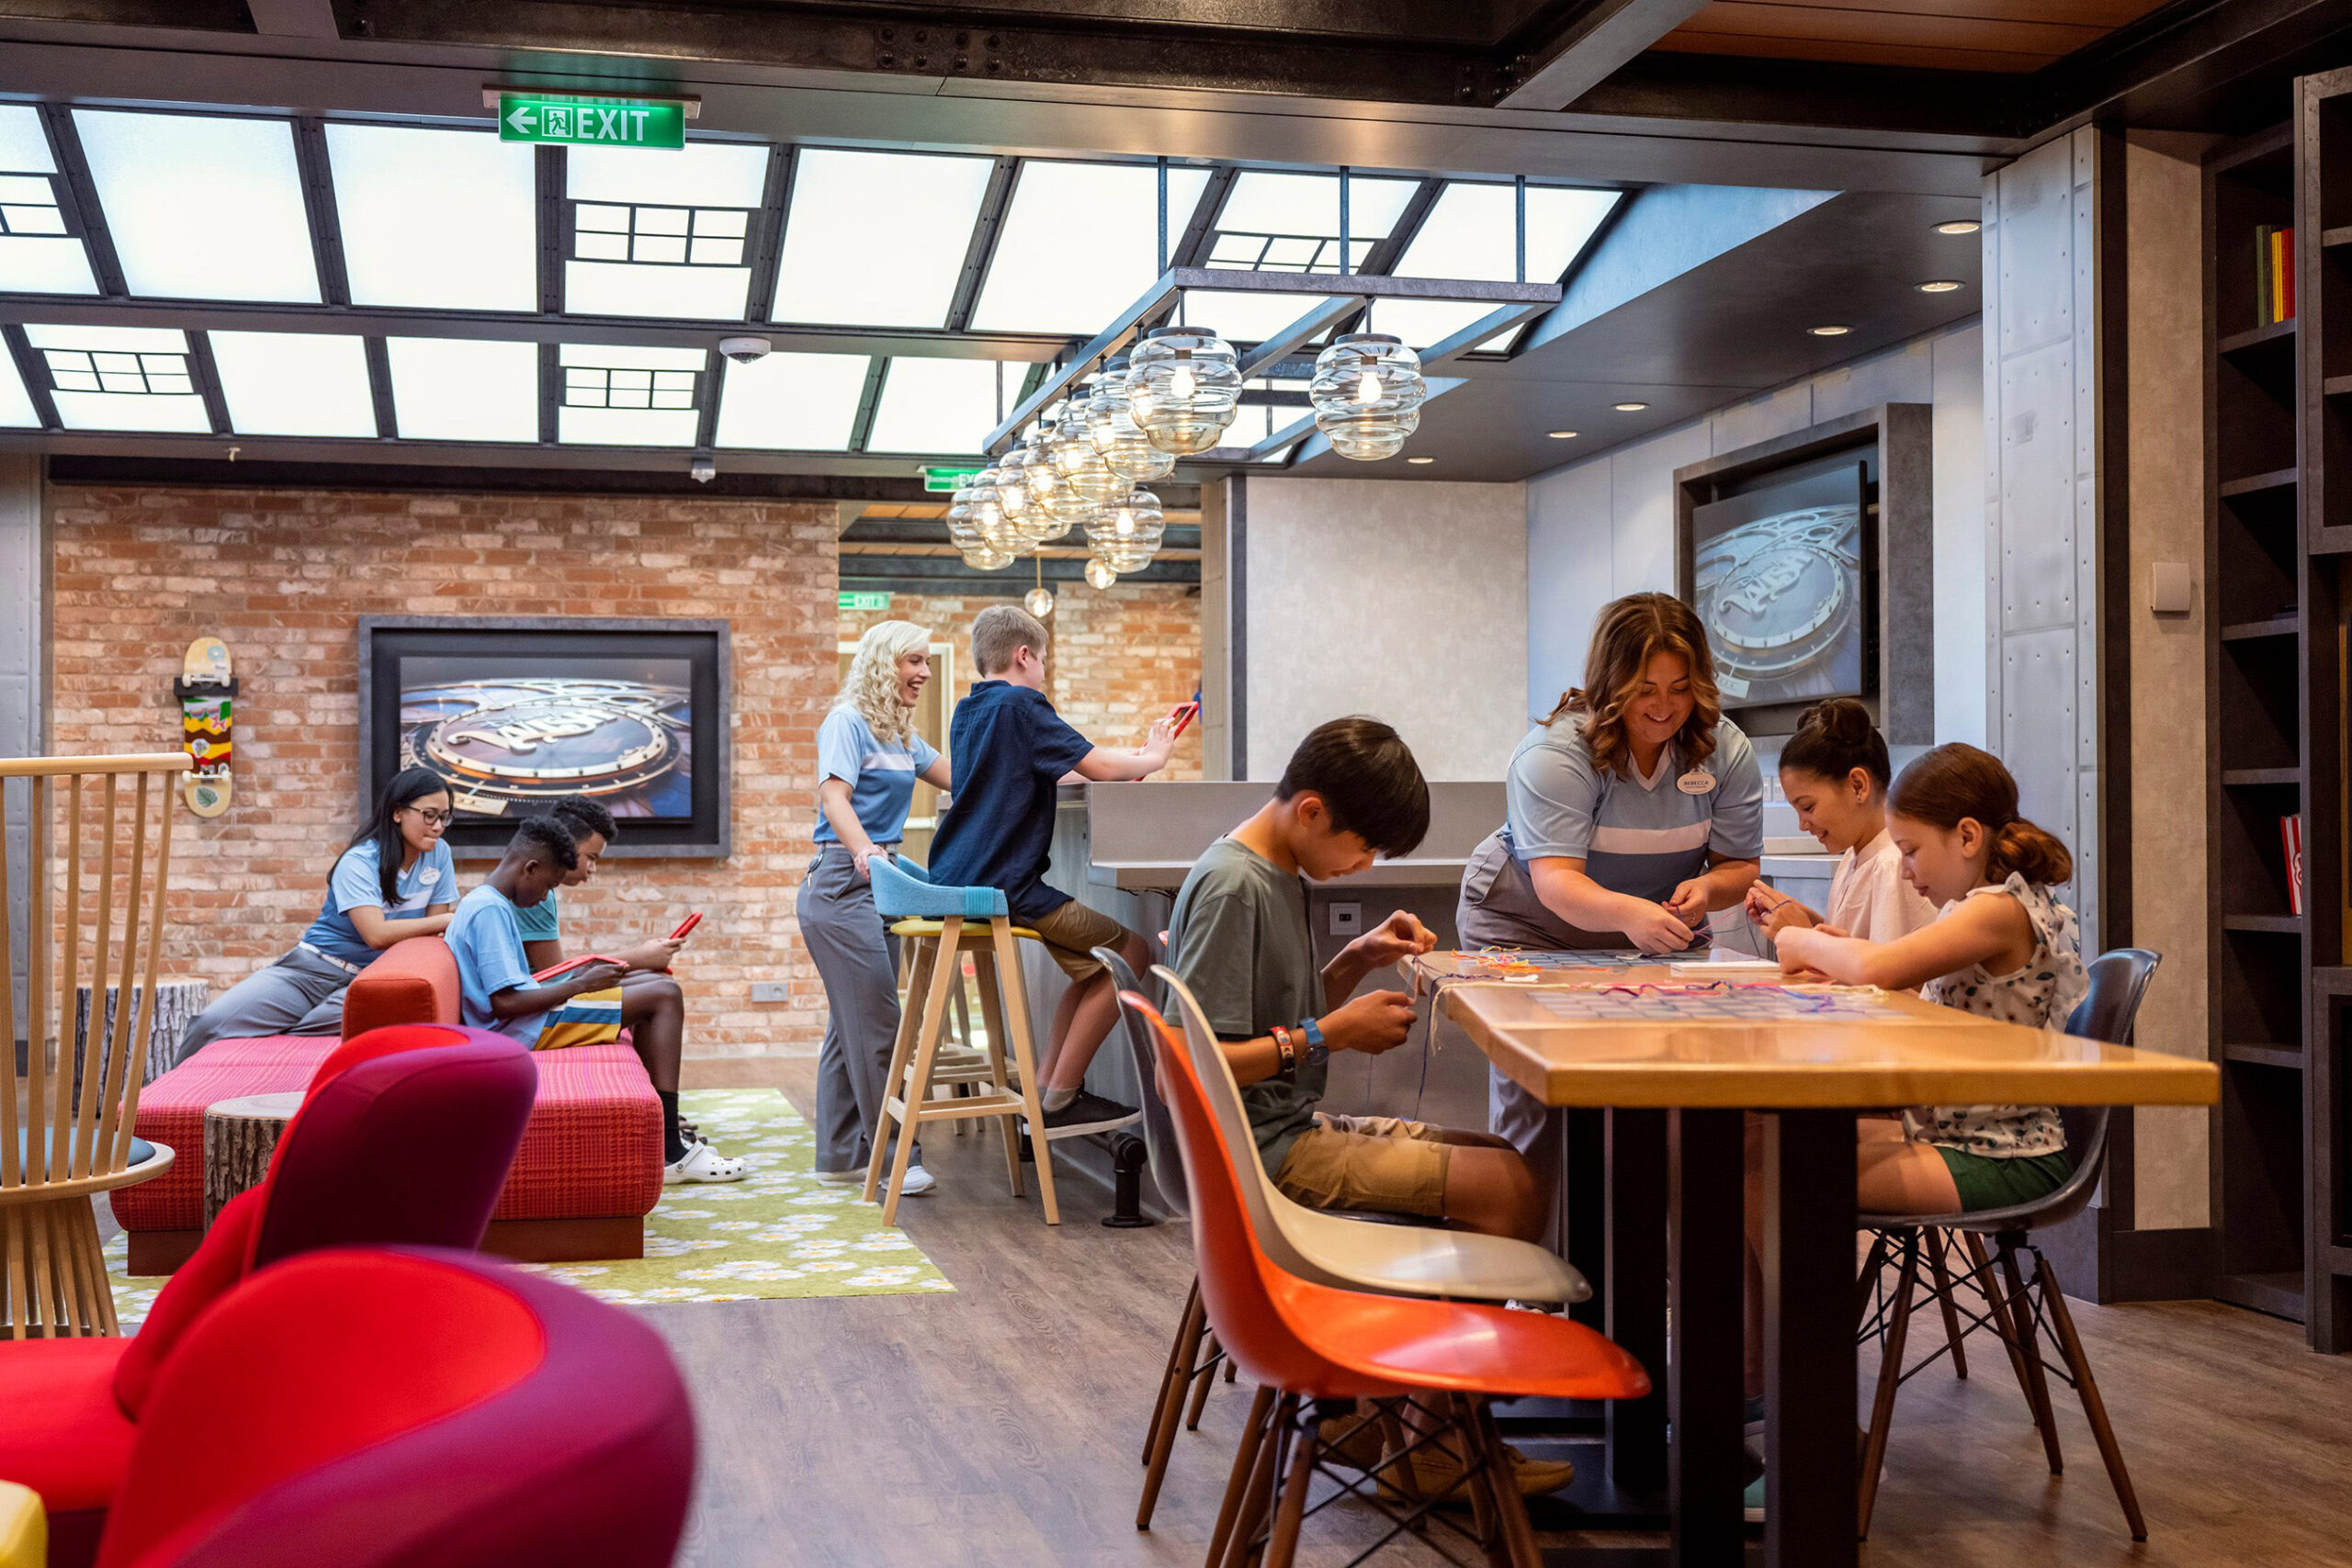 At Edge aboard the Disney Treasure, tweens will play games and make new friends in a bright, colorful hangout inspired by a chic New York City loft. (Amy Smith, photographer)